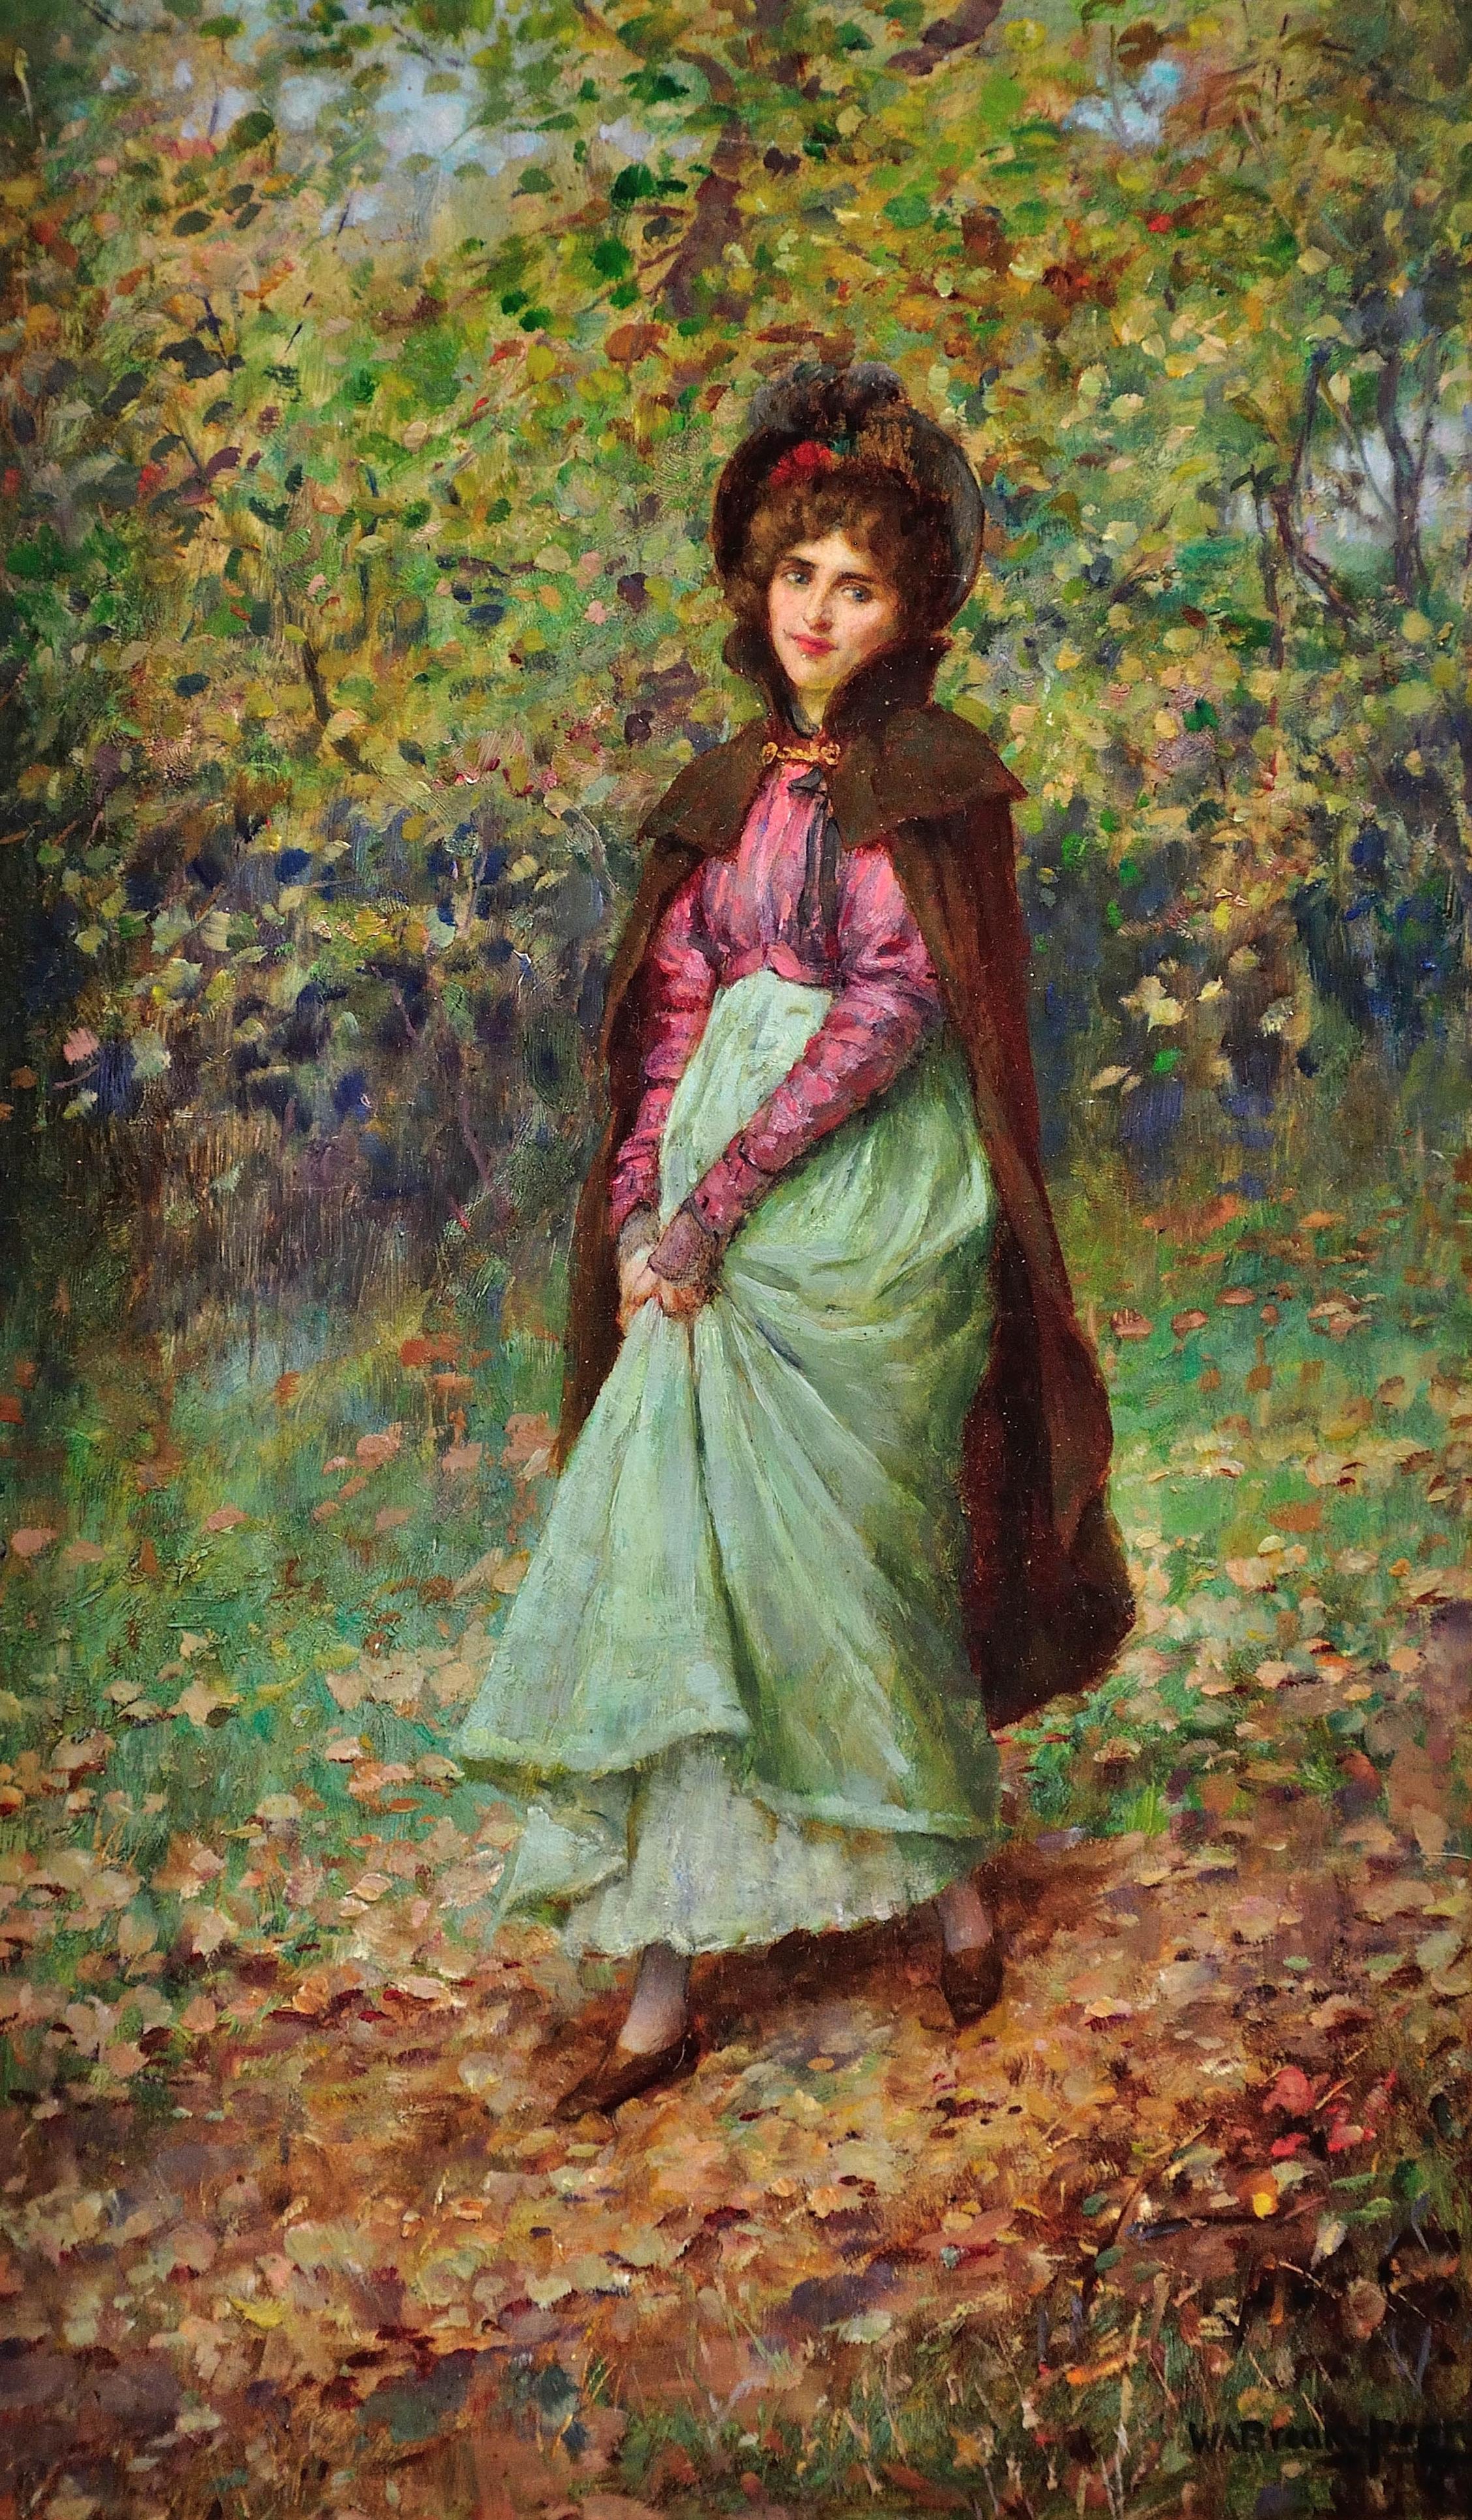 A Rendezvous in the Park. Young Lovers Meeting Out of Plain Sight. Victorian Art - Painting by William Arthur Breakspeare